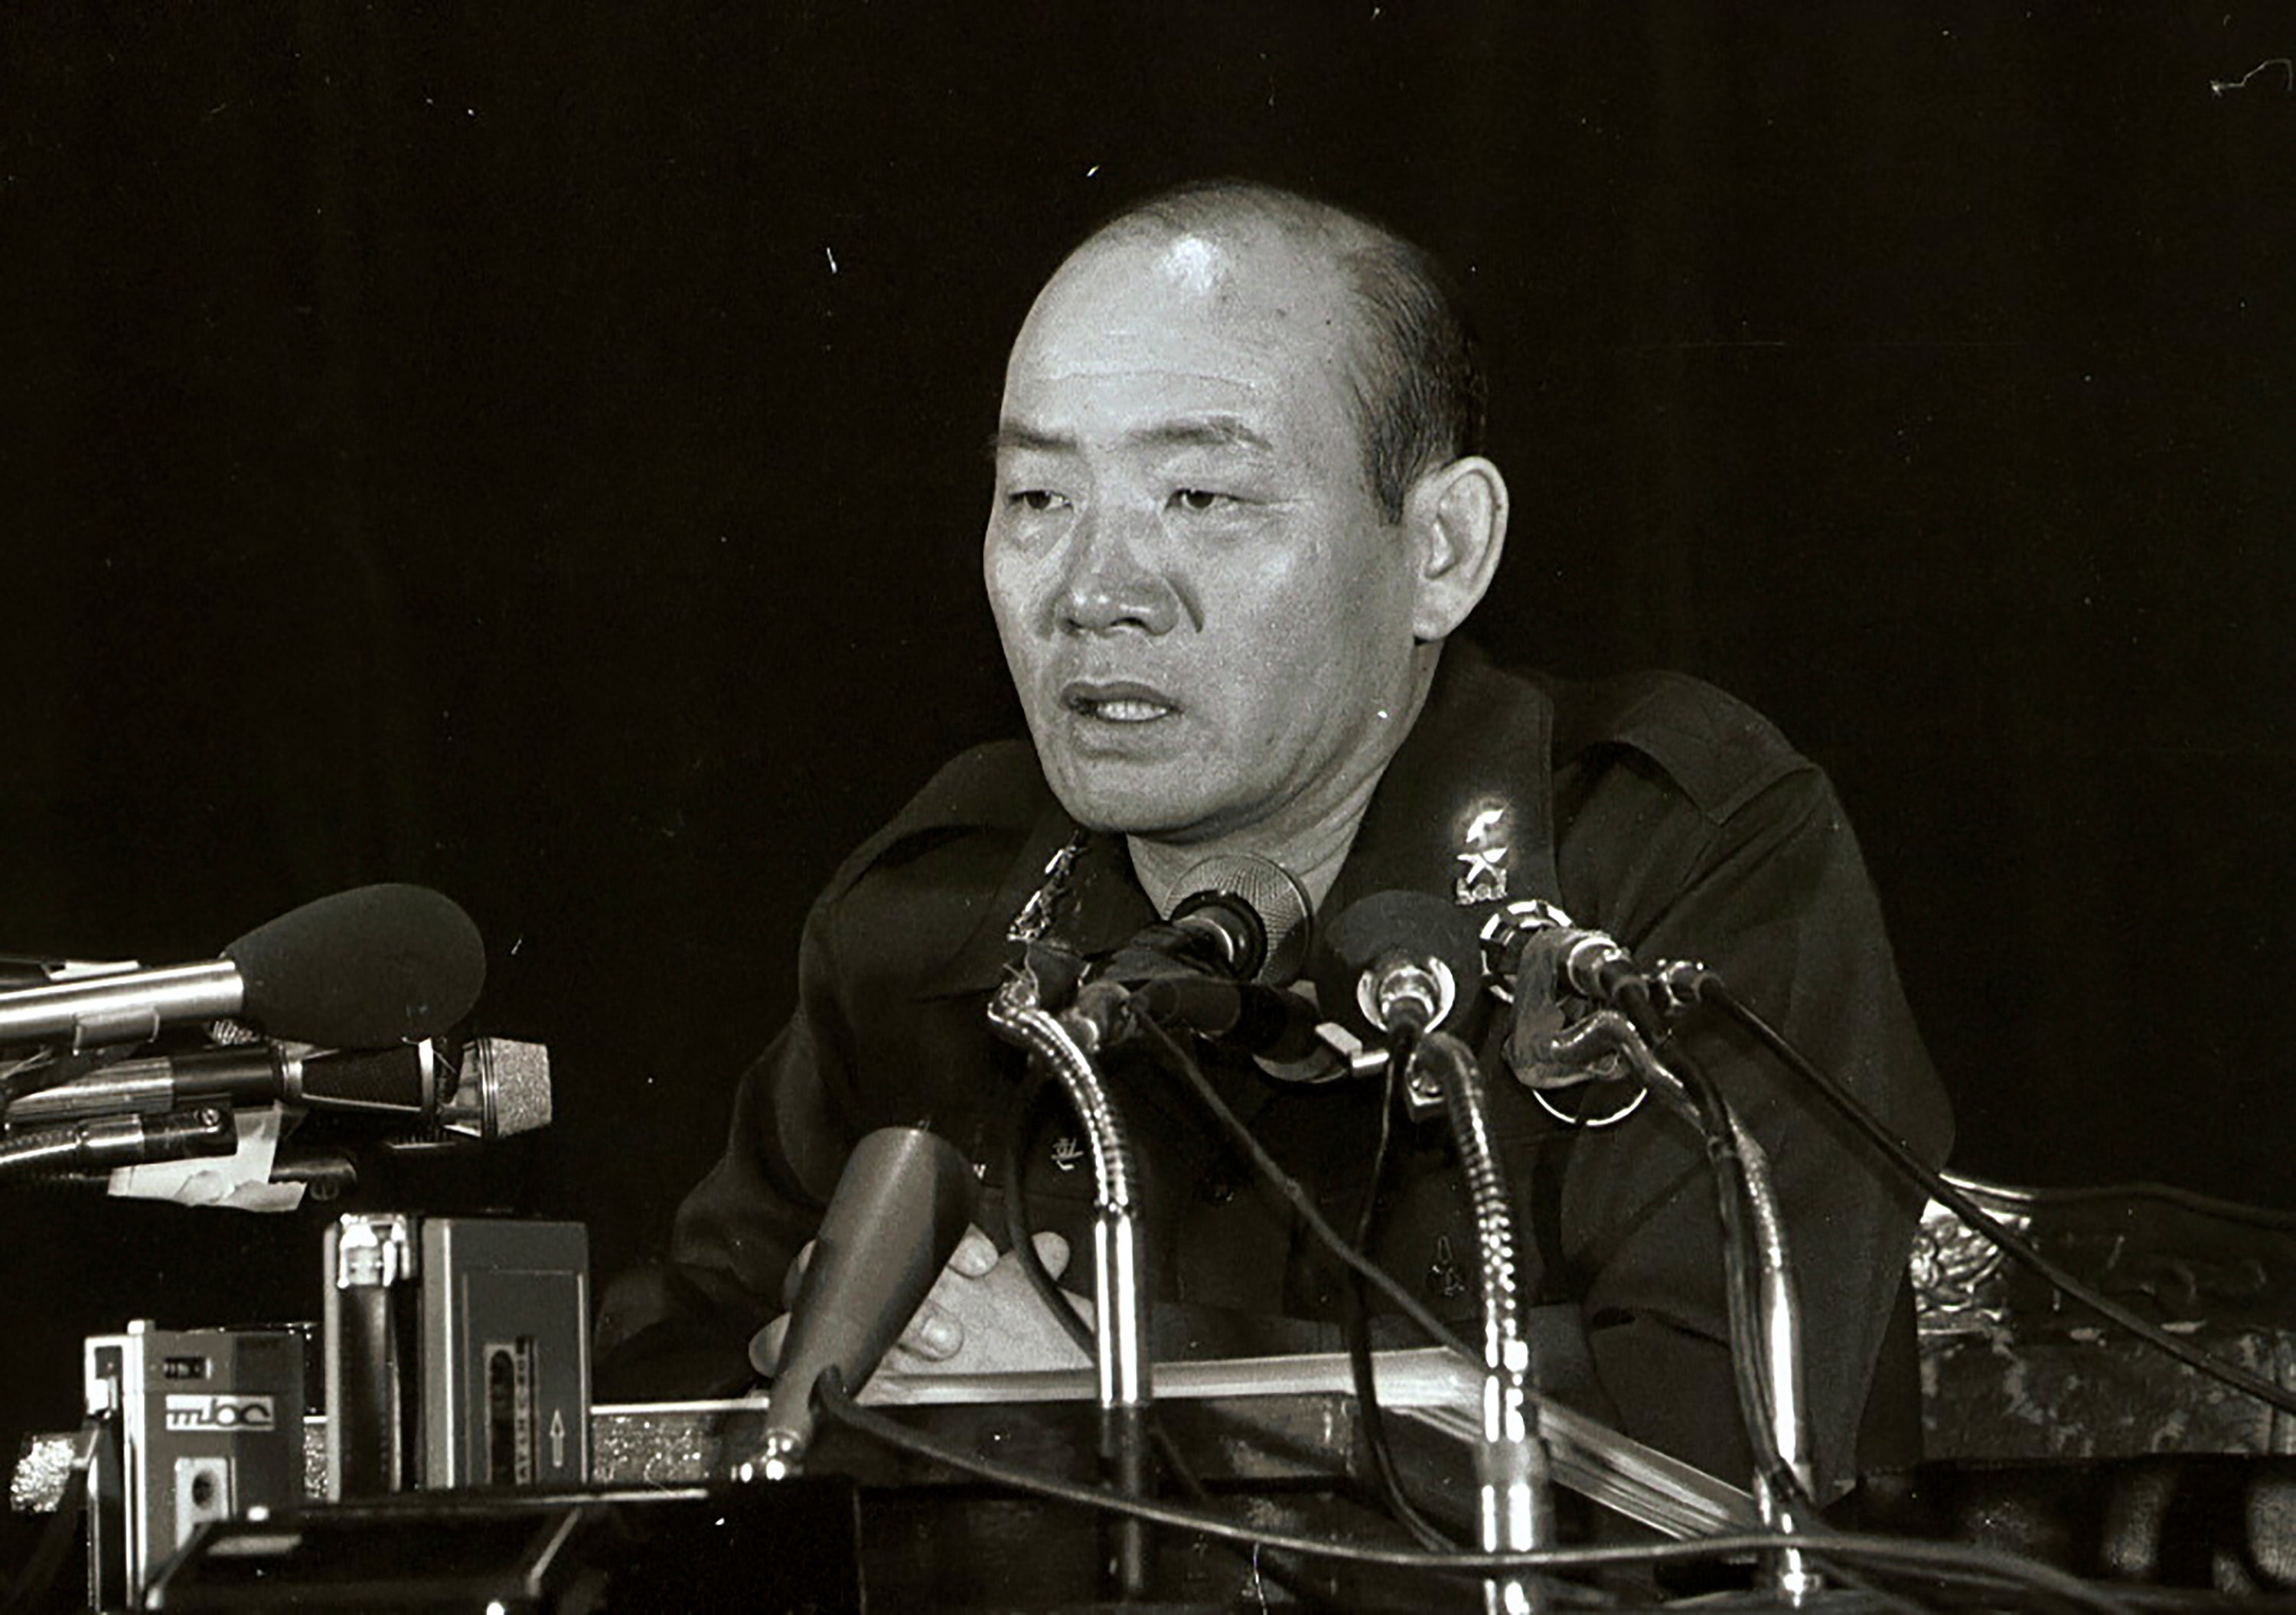 Former South Korean military strongman Chun, who crushed pro-democracy demonstrations in 1980, died on Tuesday